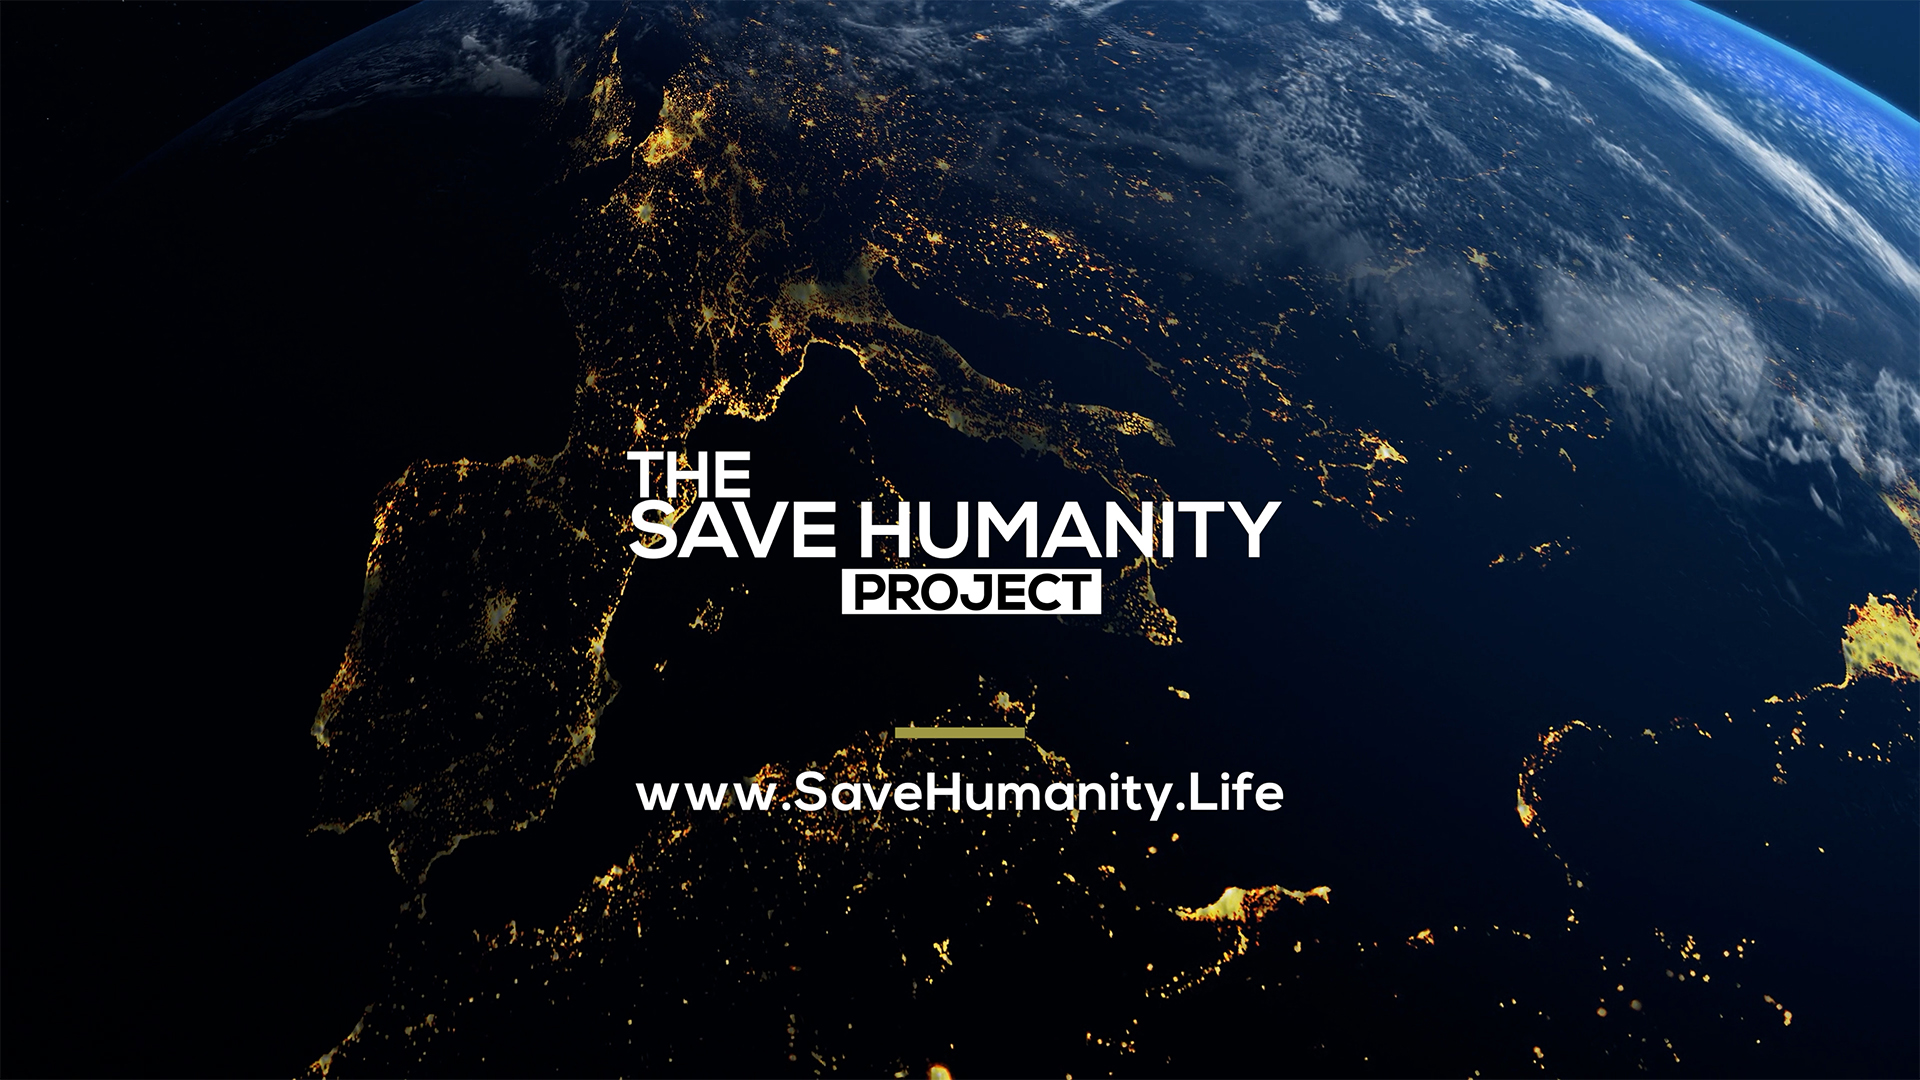 “The Save Humanity Project” First Official Trailer